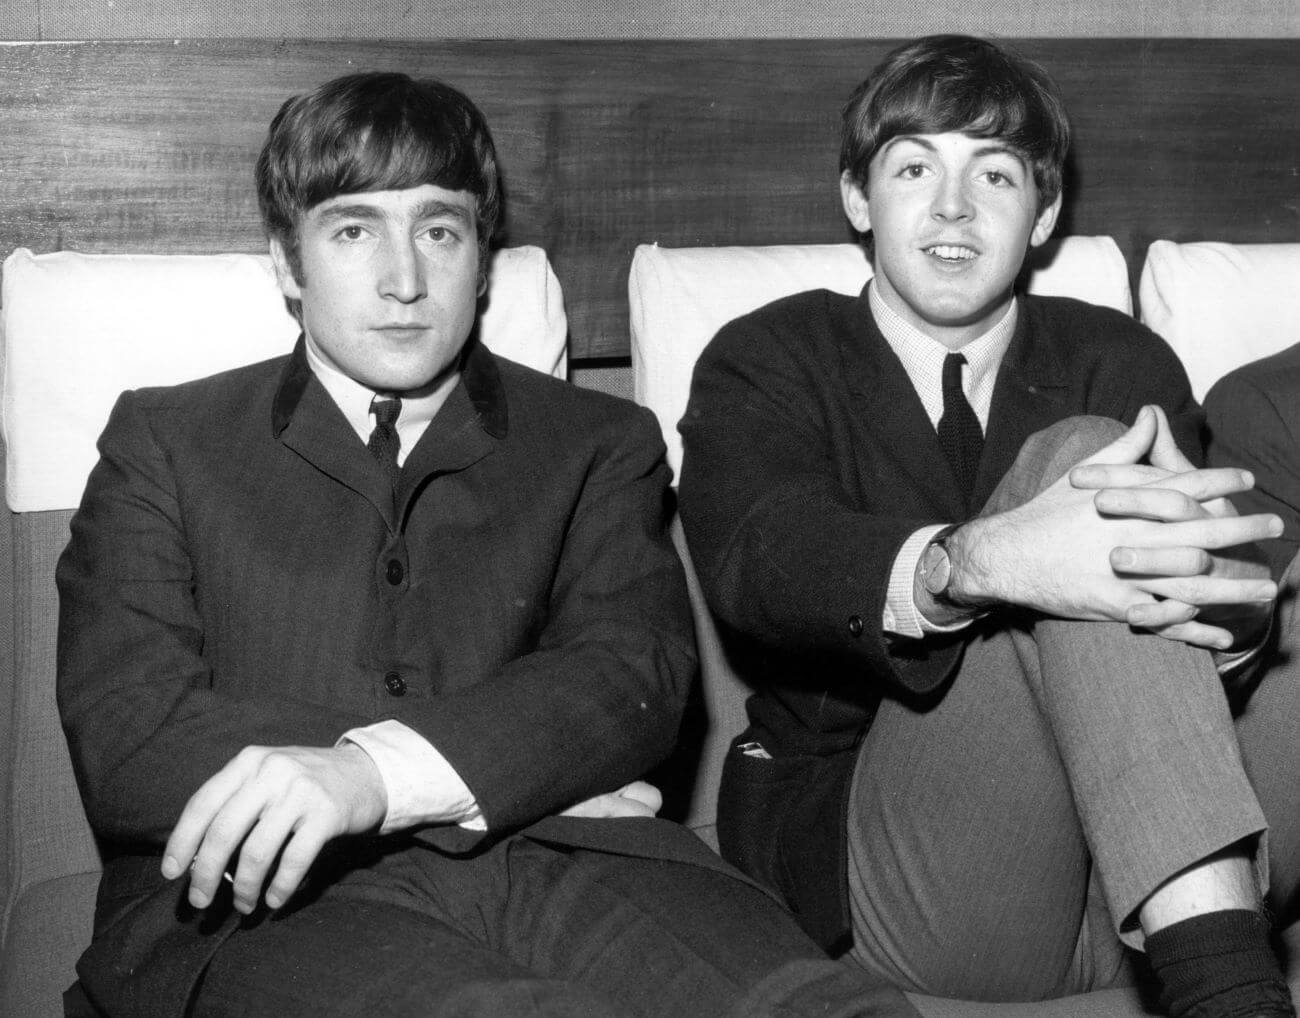 A black and white picture of John Lennon and Paul McCartney sitting next to each other on a couch.